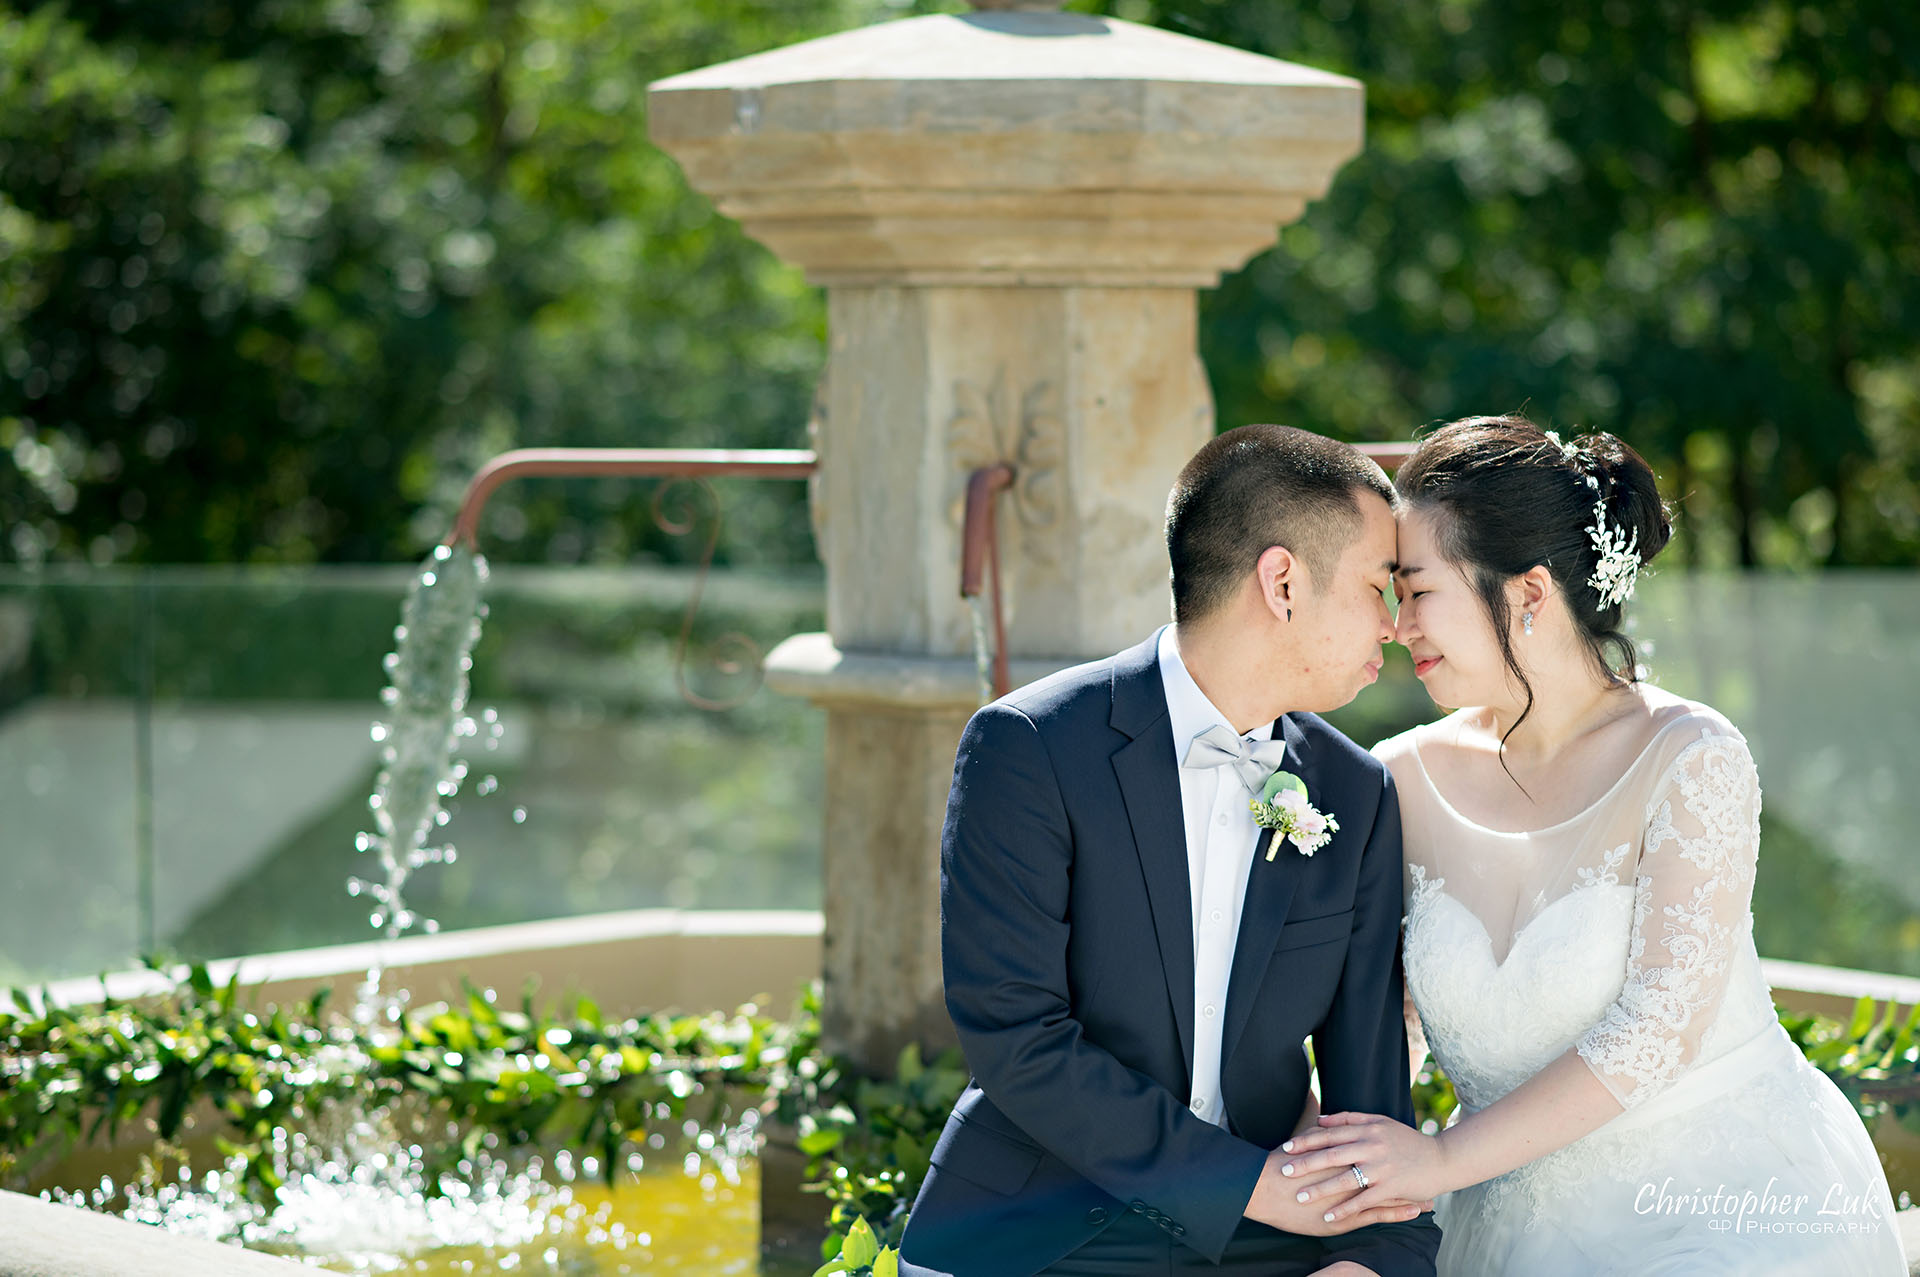 Christopher Luk Toronto Wedding Photographer The Doctor's House Chapel Kleinburg Natural Candid Photojournalistic Posed Bride Groom Waterfall Holding Each Other Intimate Landscape Micro Microwedding 